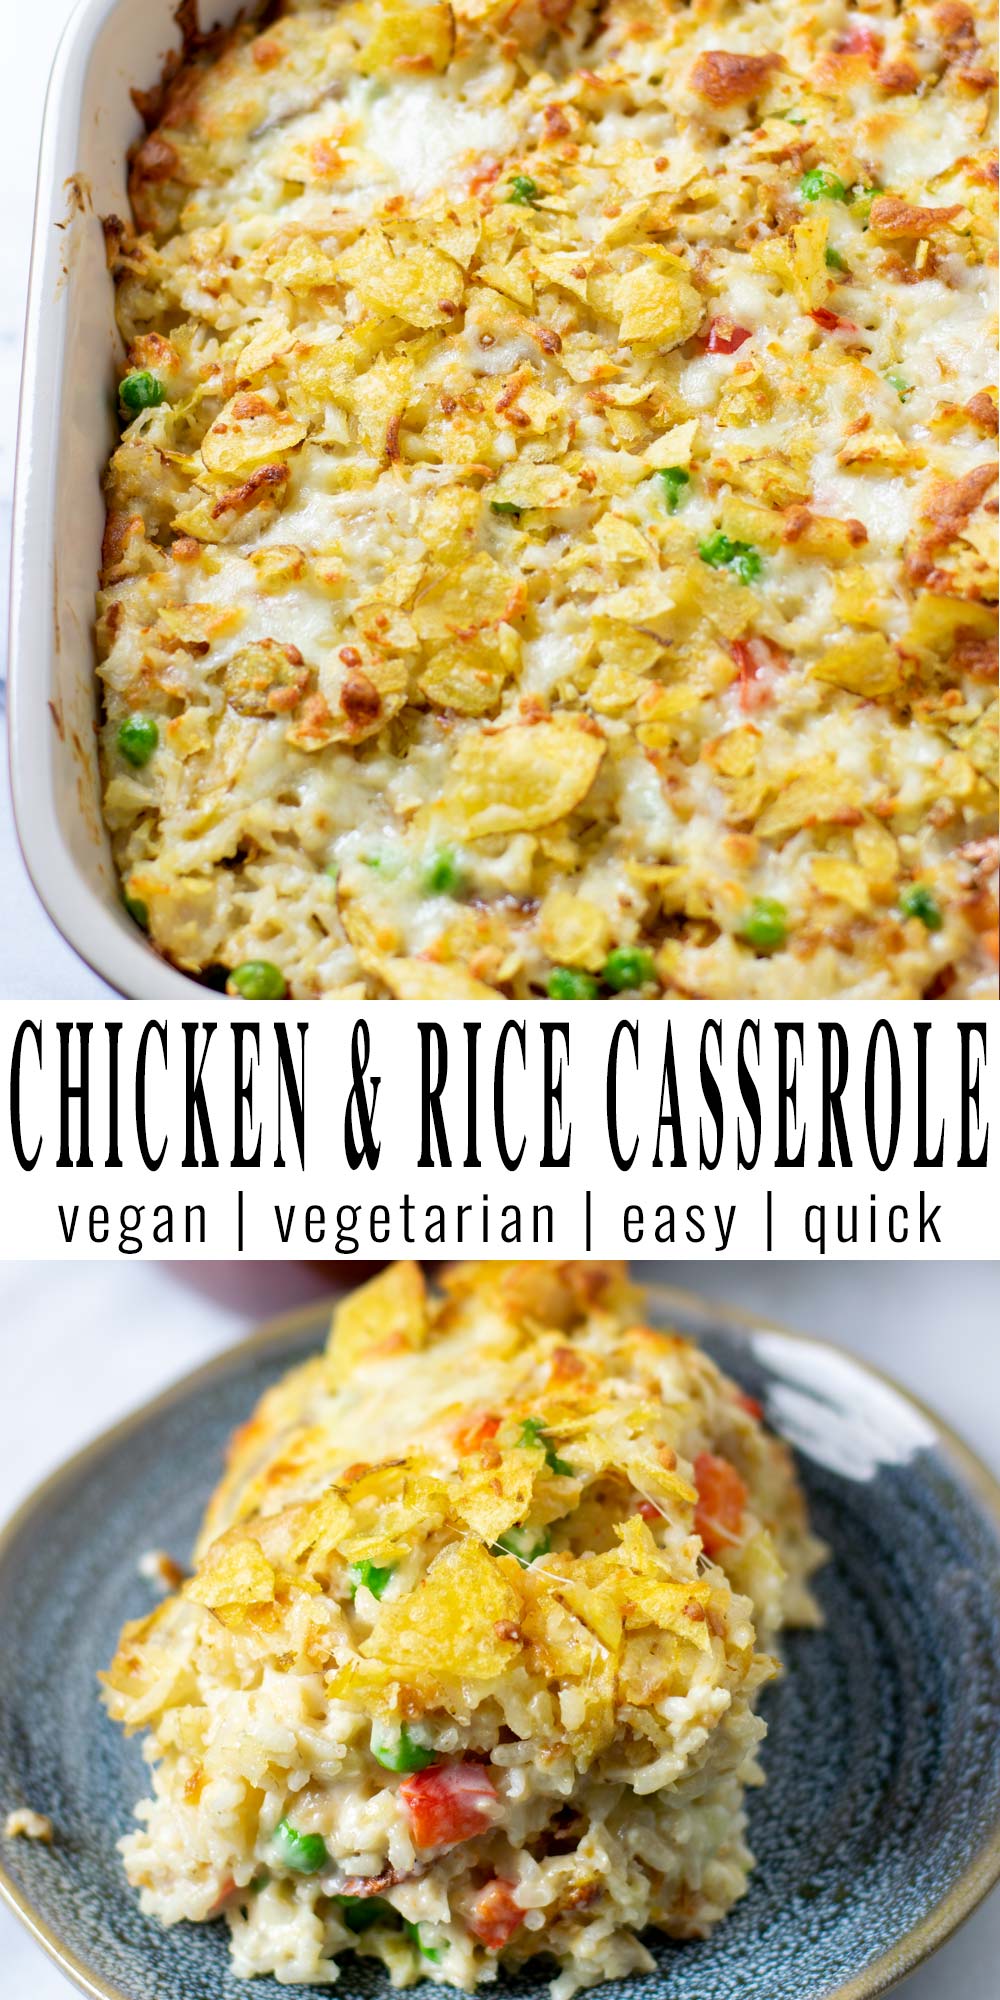 Collage of two pictures of the Chicken and Rice Casserole with recipe title text.